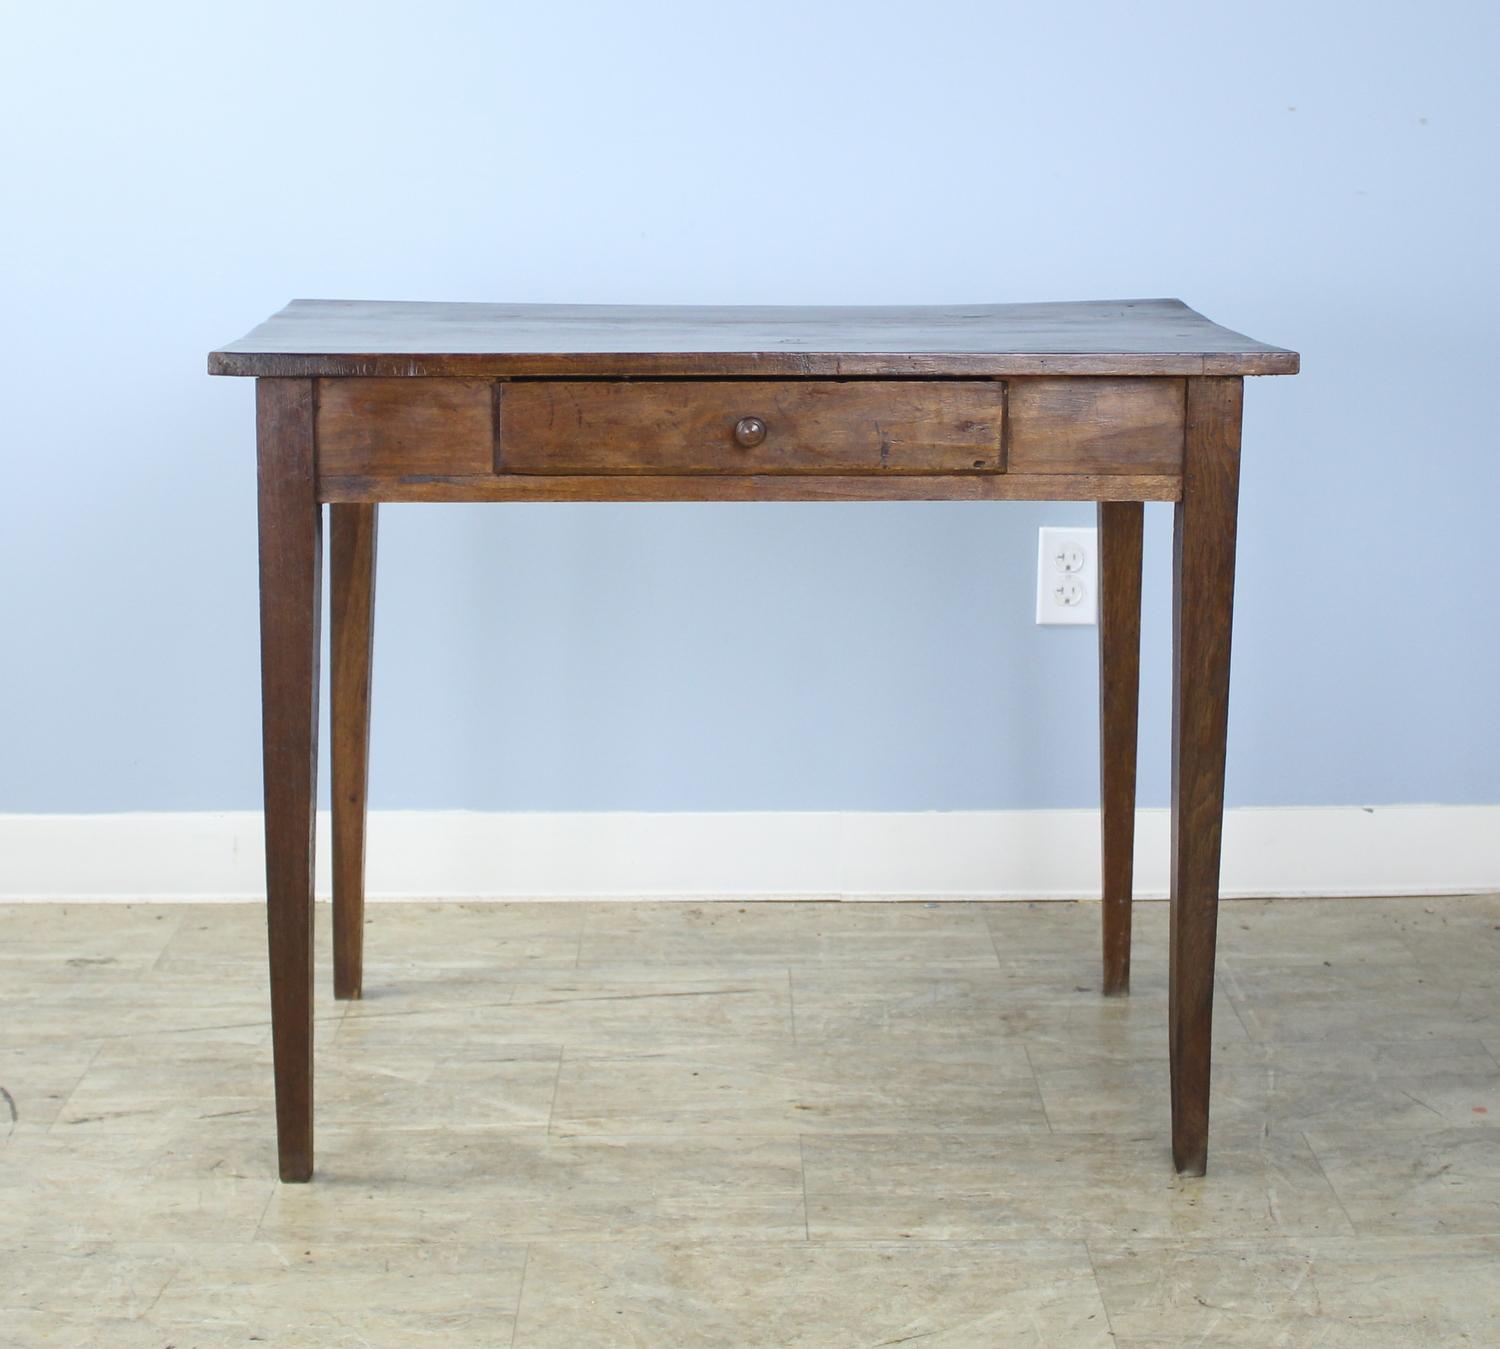 A French antique side table in dark elm with tapered legs and good graining on the top. Small single drawer adds nice detail. There is a small lift at the back of the top which does not affect the utility but is visible.